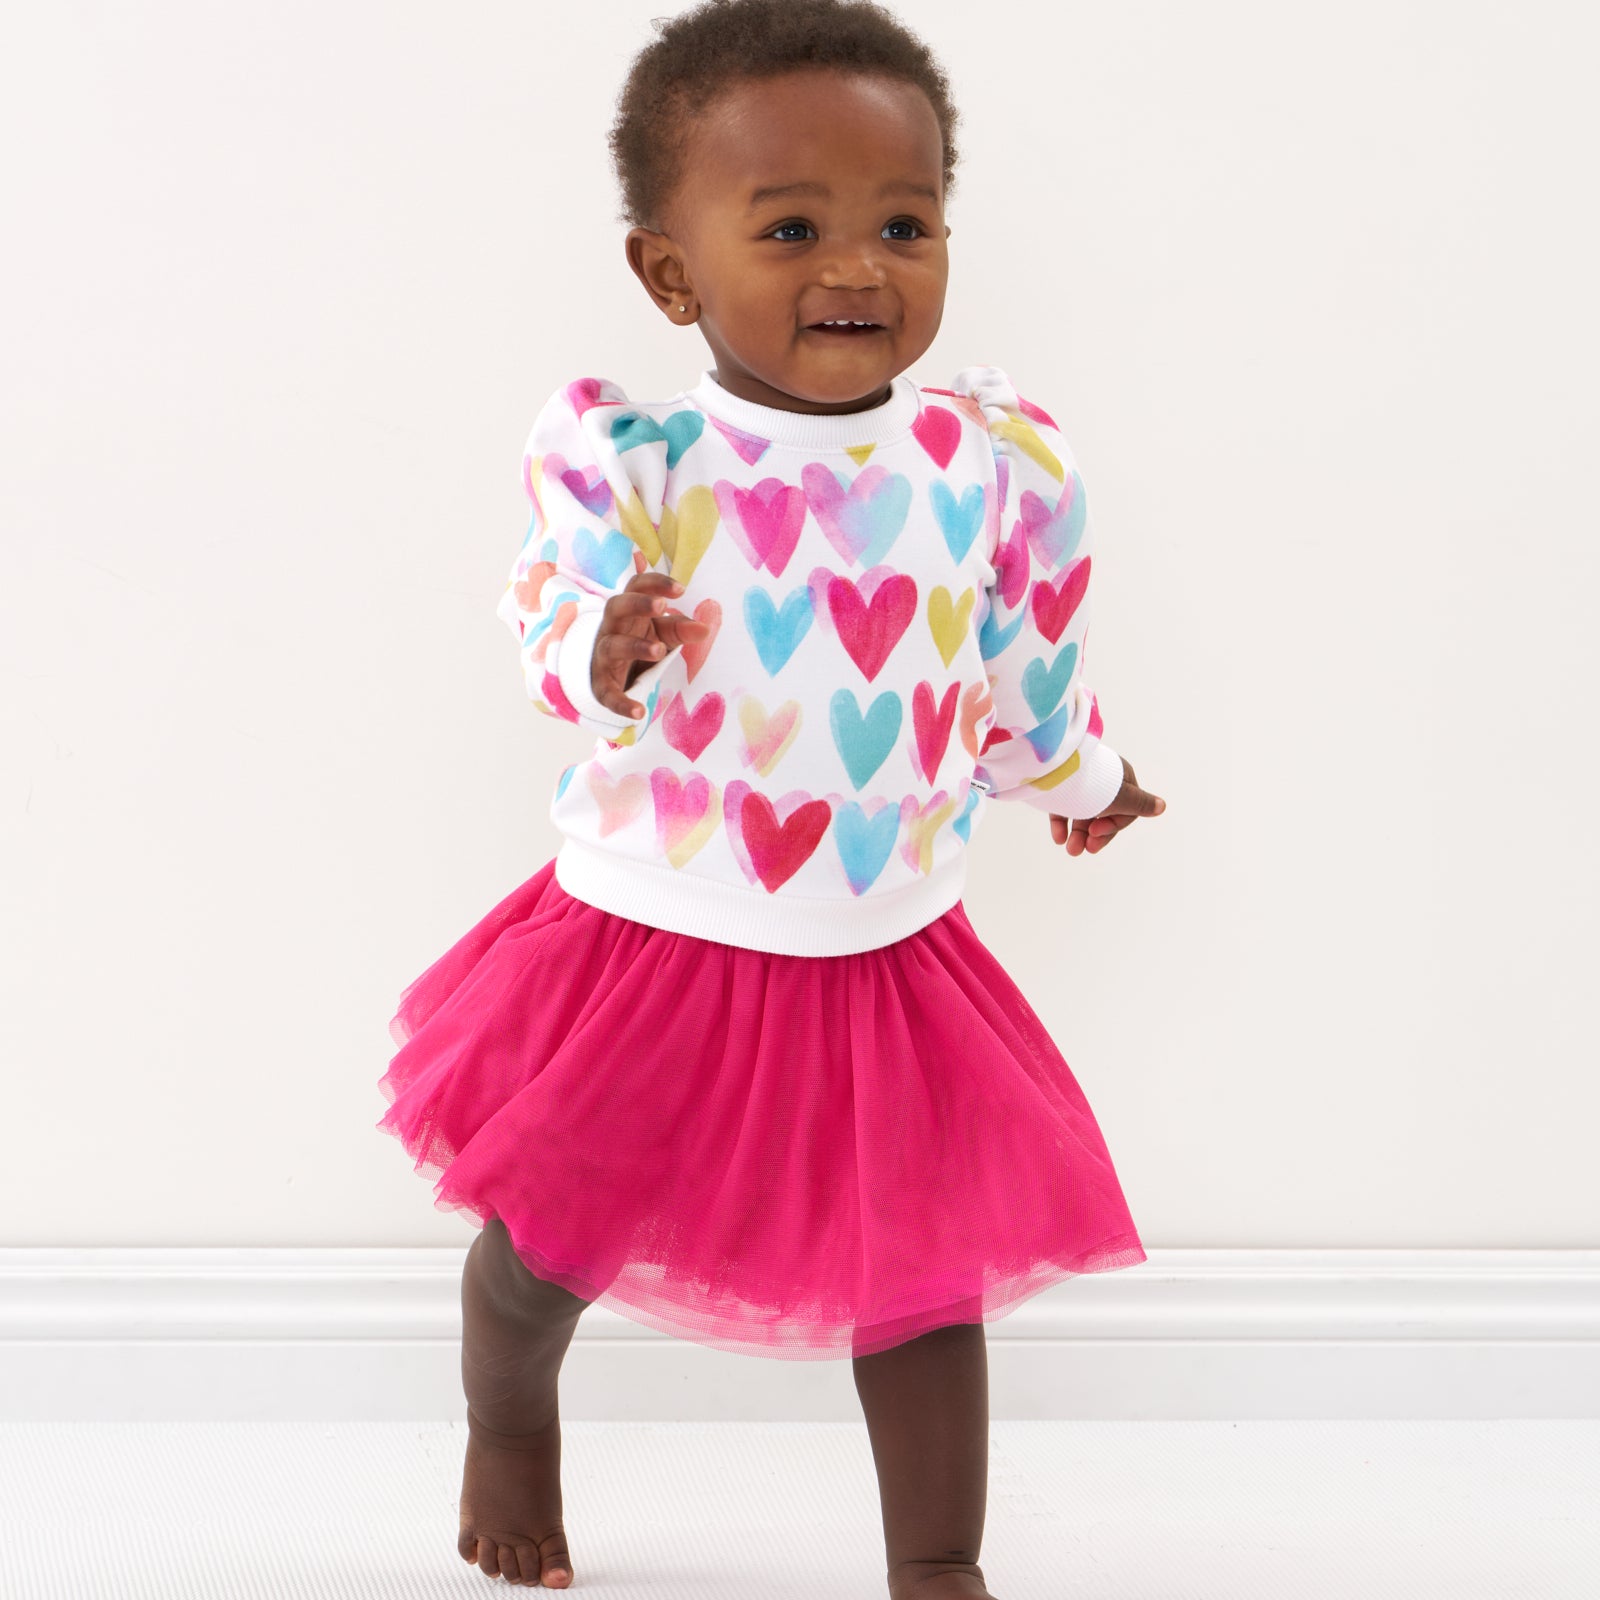 Baby in heart crewneck and tutu skirt